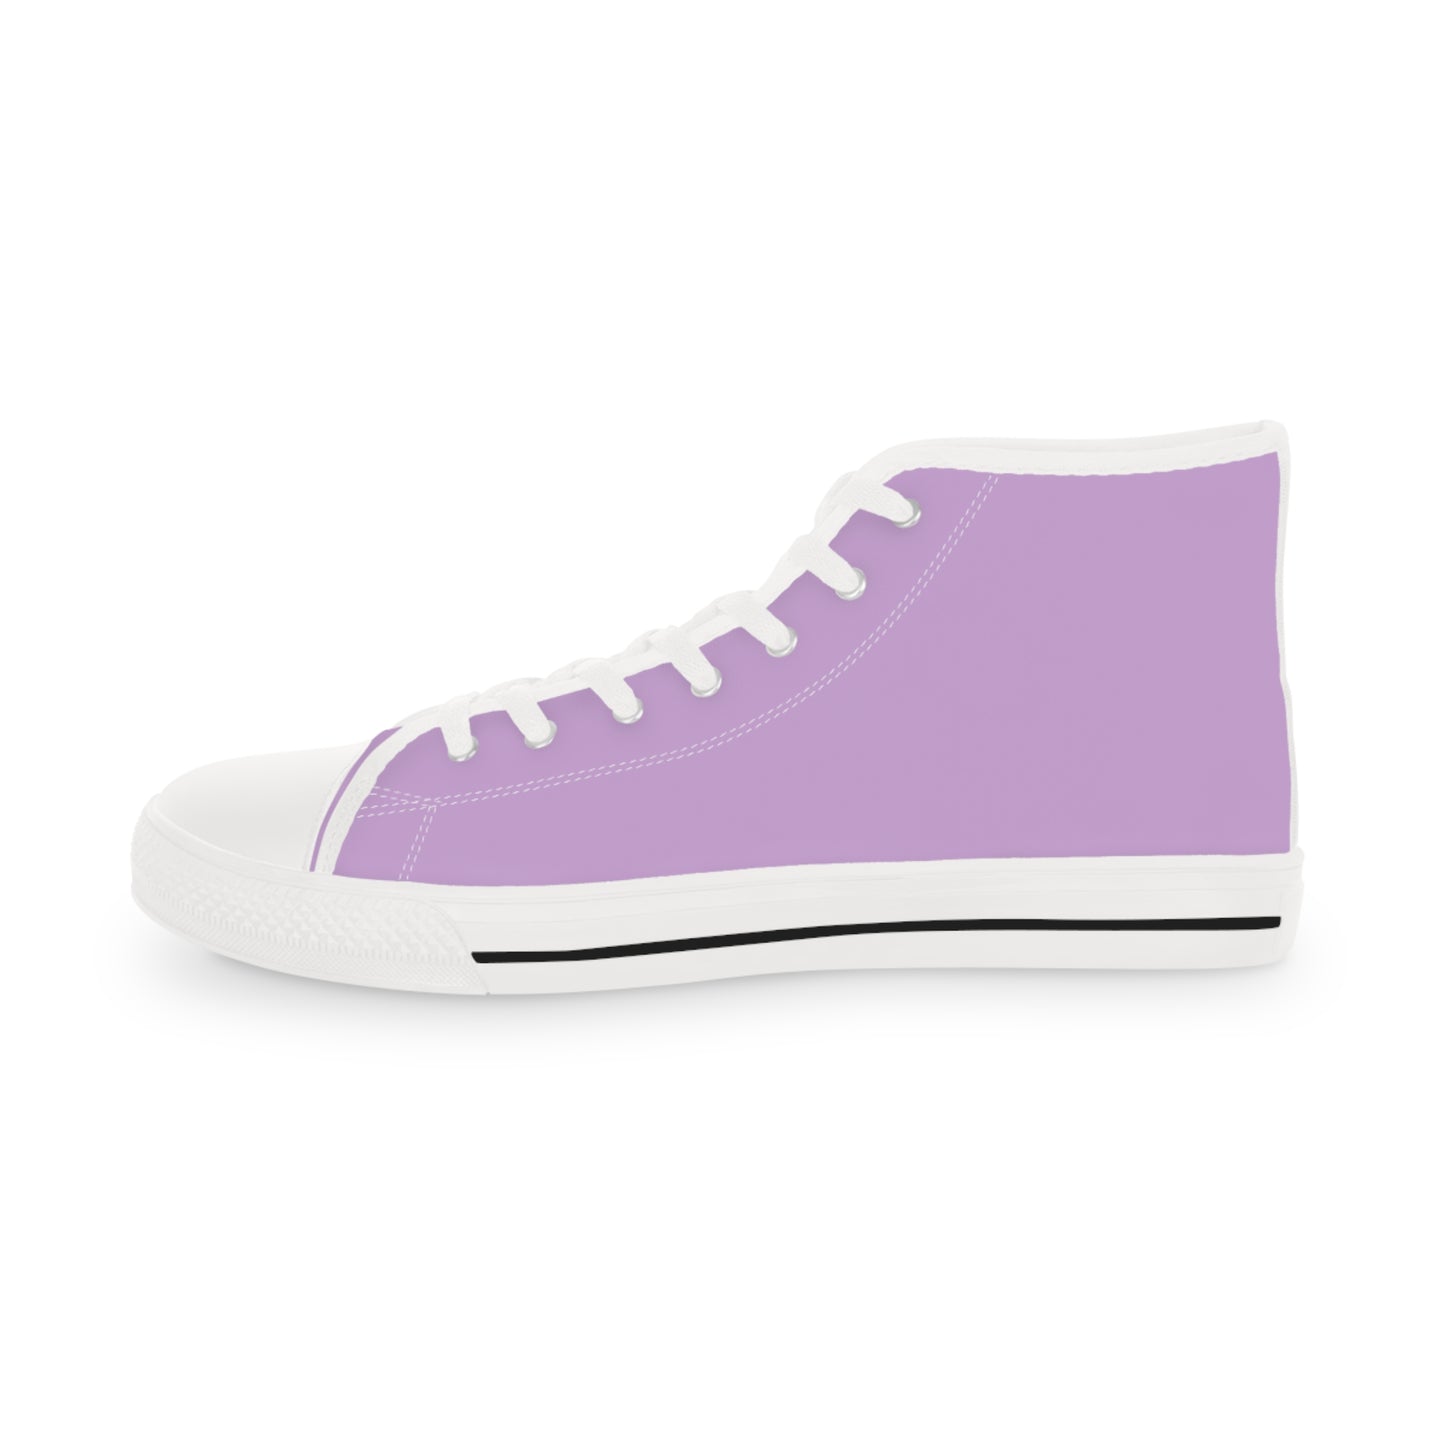 Men's Canvas High Top Solid Color Sneakers - Pinky Purple US 14 White sole